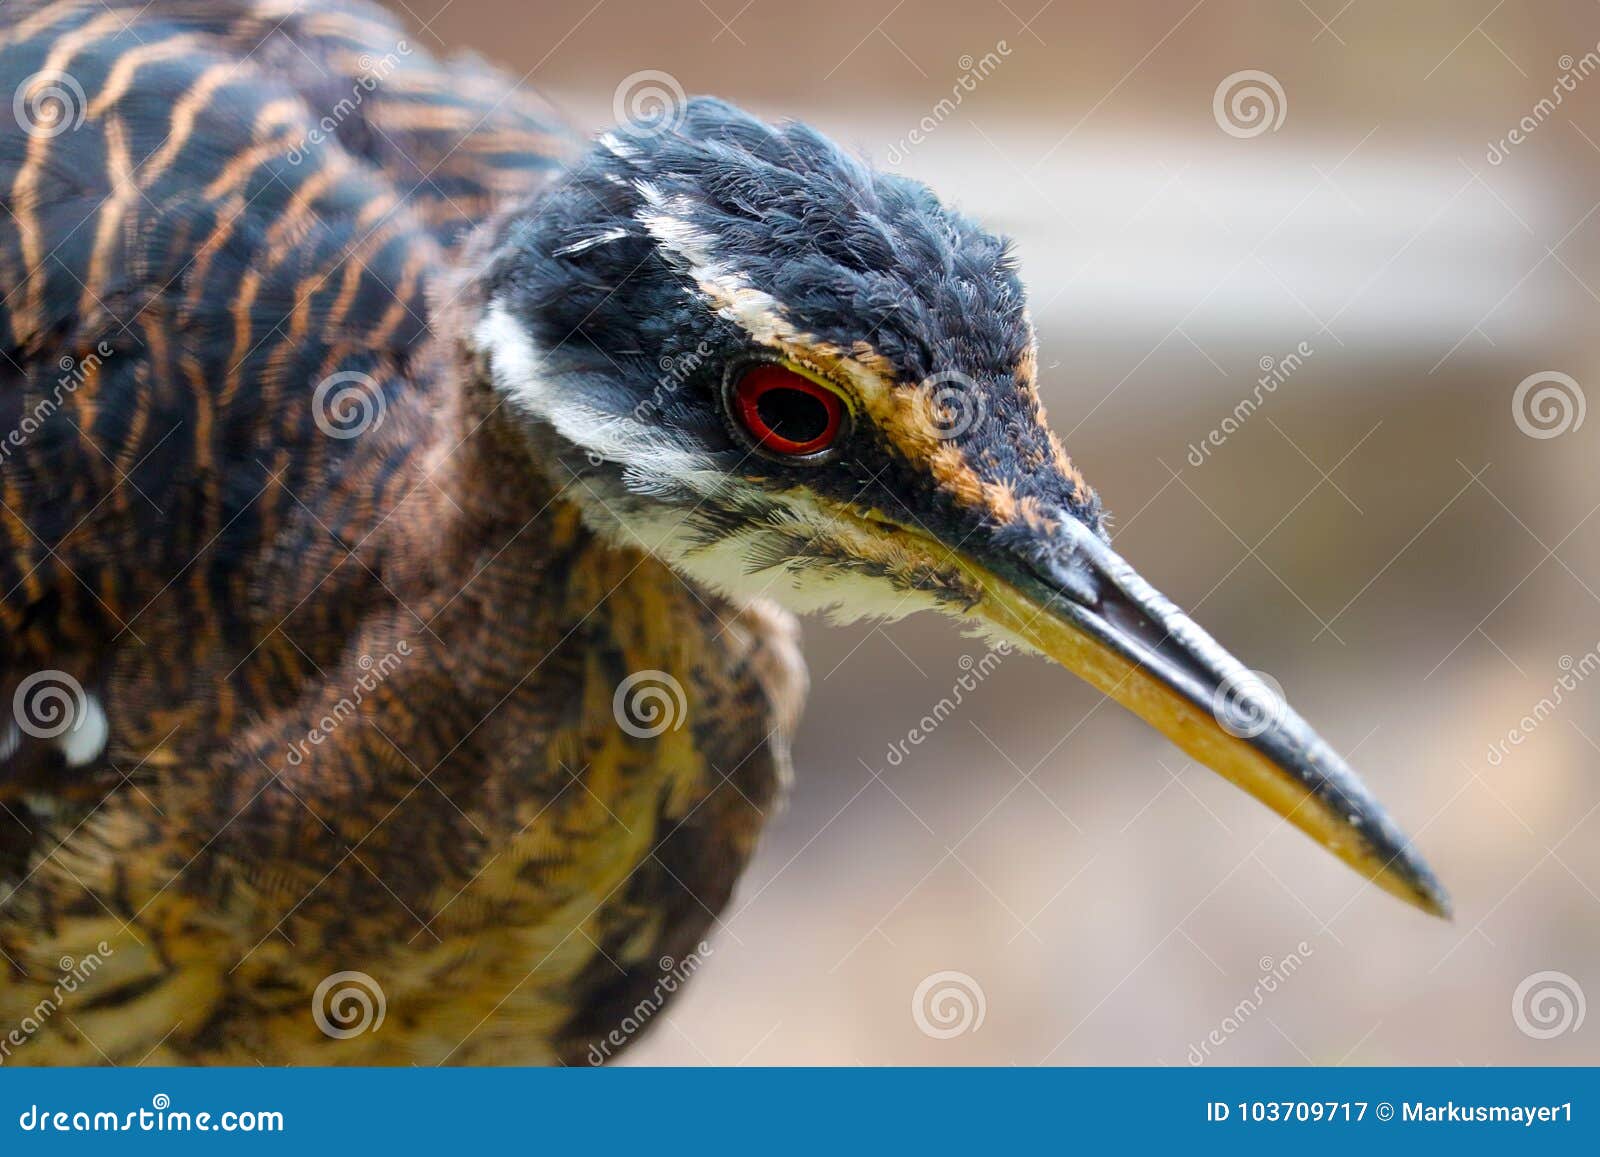 Head of a Sunbittern Bird with a Long Pointed Beak Stock Image - Image of  wildlife, south: 103709717